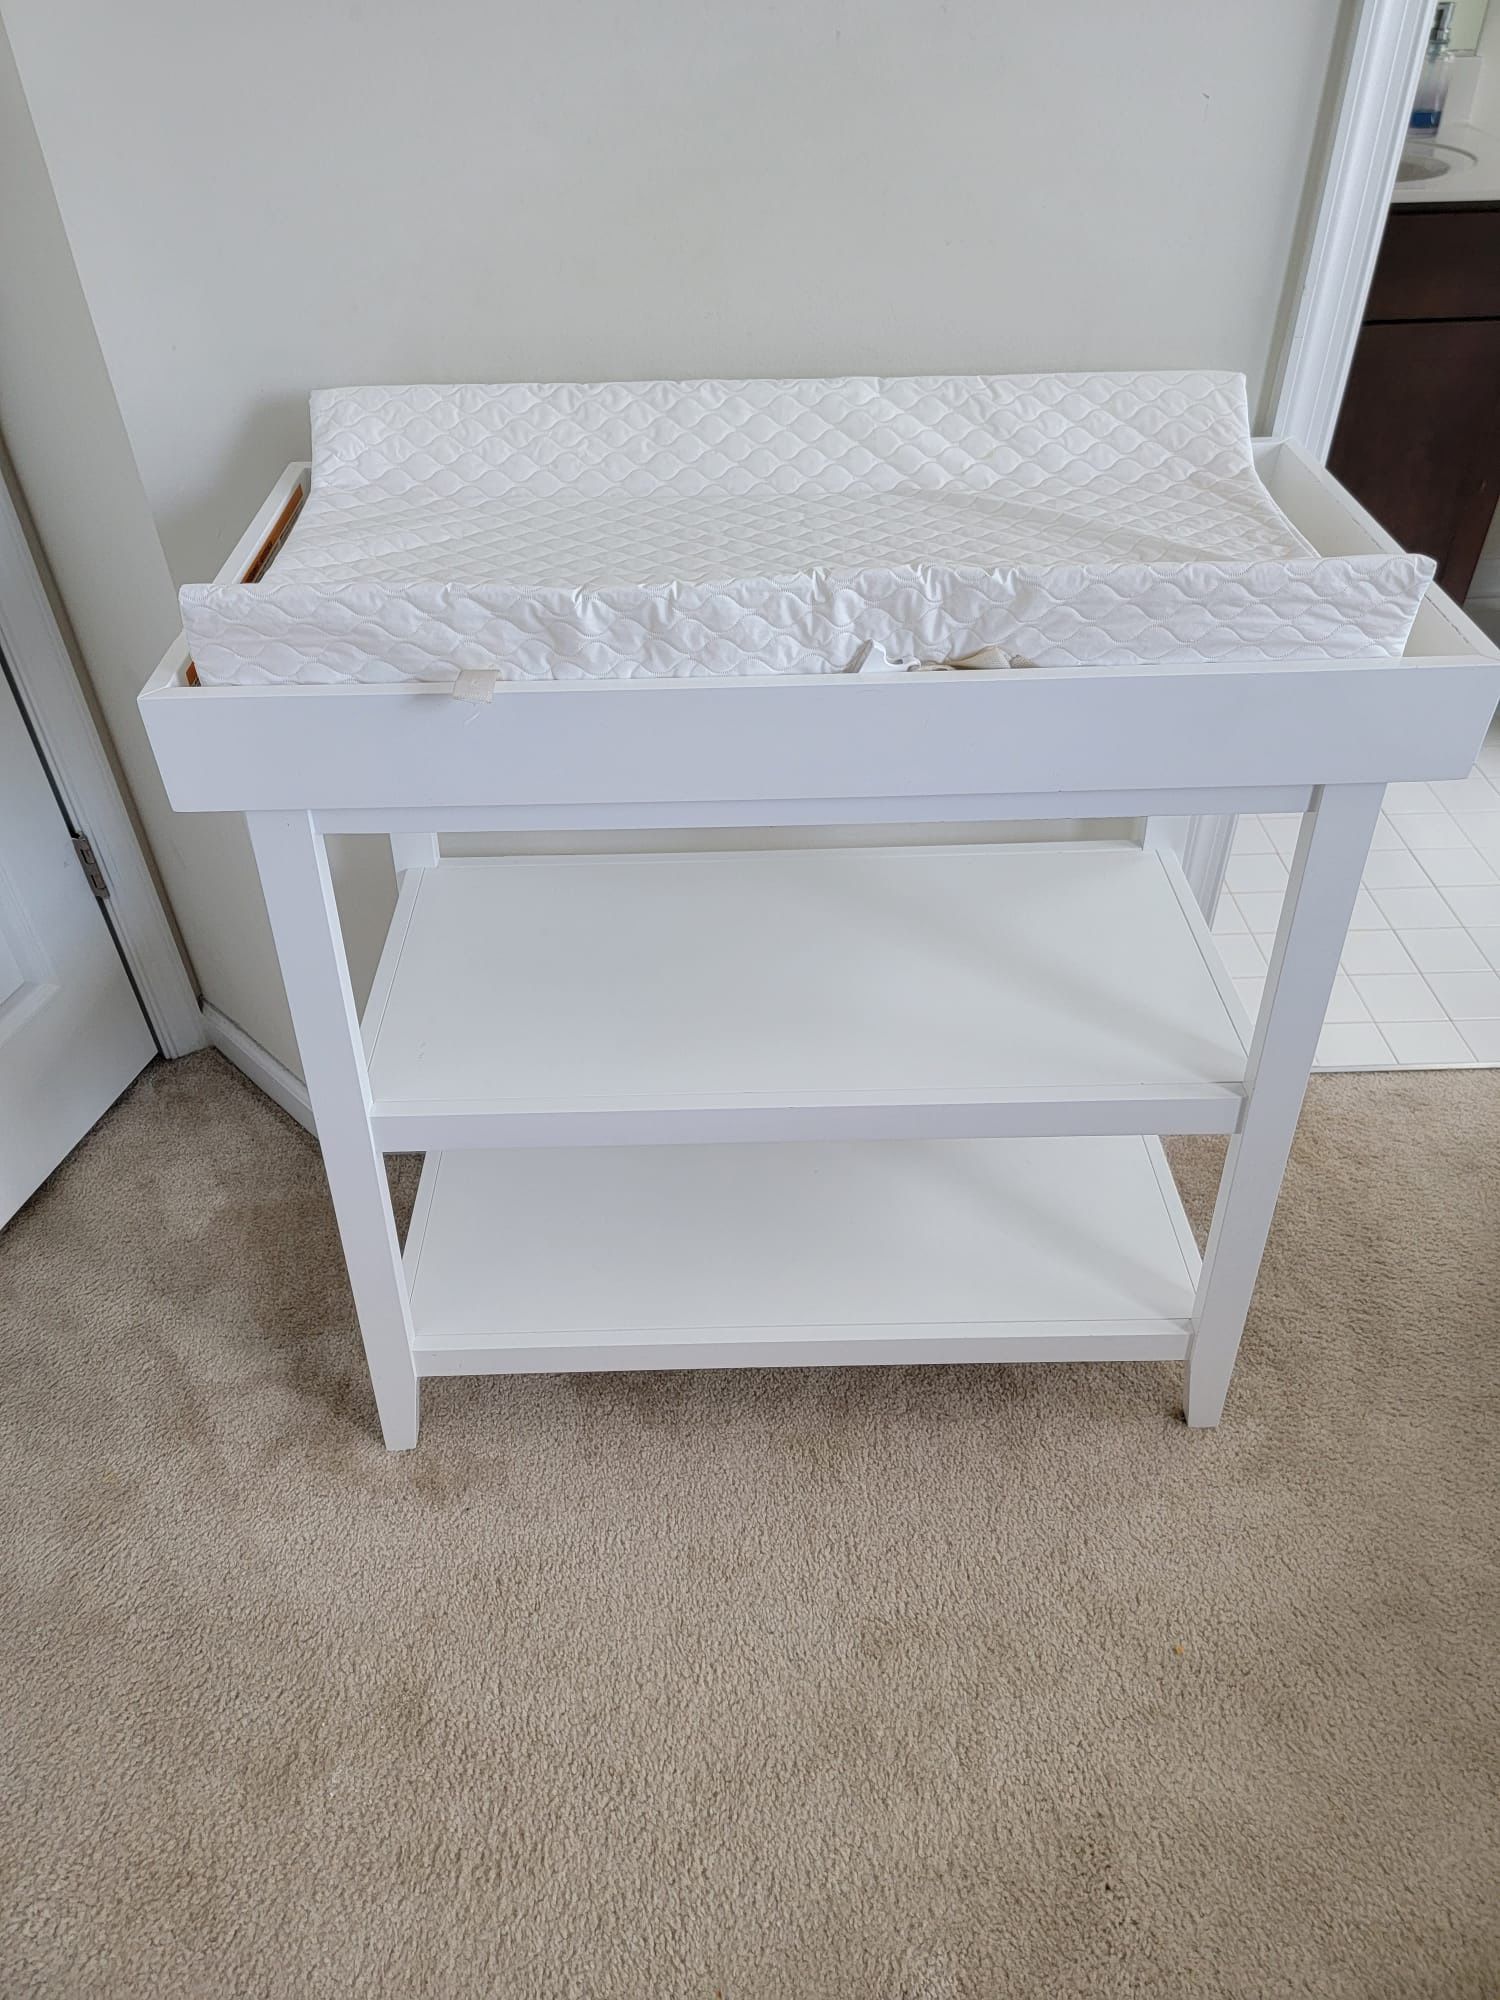 Crate and Barrel Changing Table 